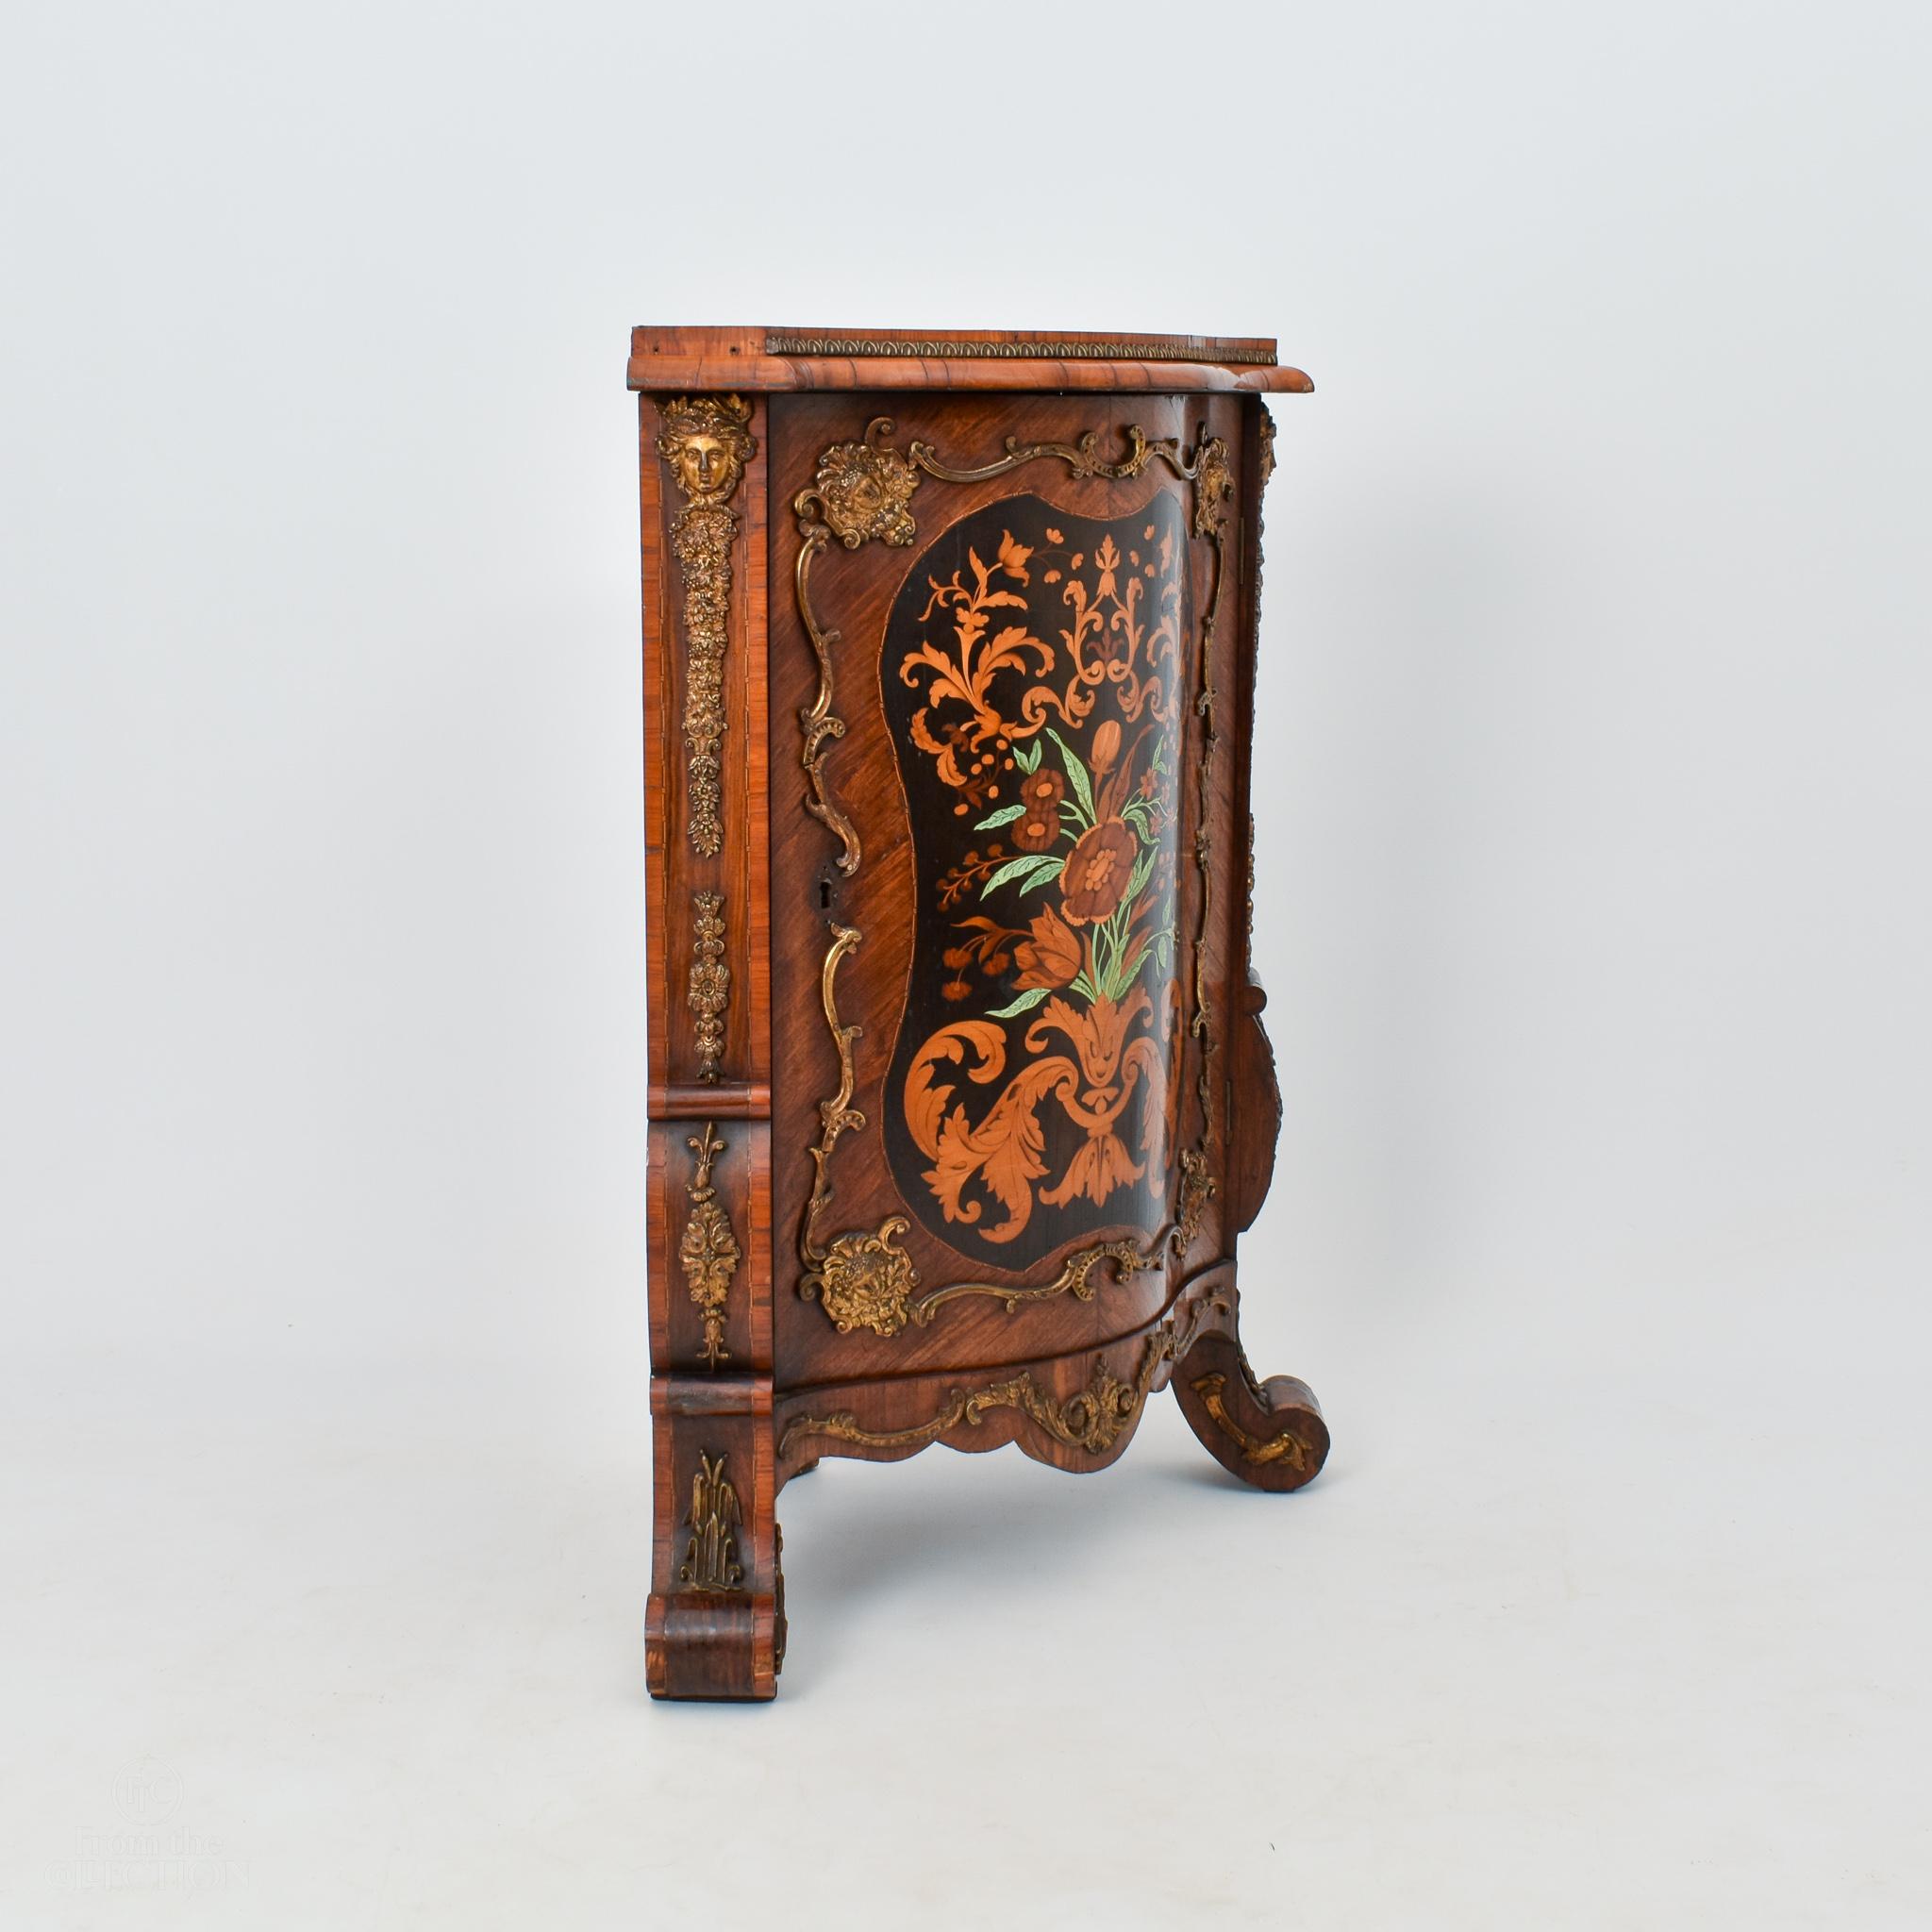 An exceptional testament to the artistry of the late 19th century, these exceedingly rare marquetry corner cabinets, dating back to circa 1880, stand as captivating showcases of intricate craftsmanship. The harmonious marriage of marquetry and